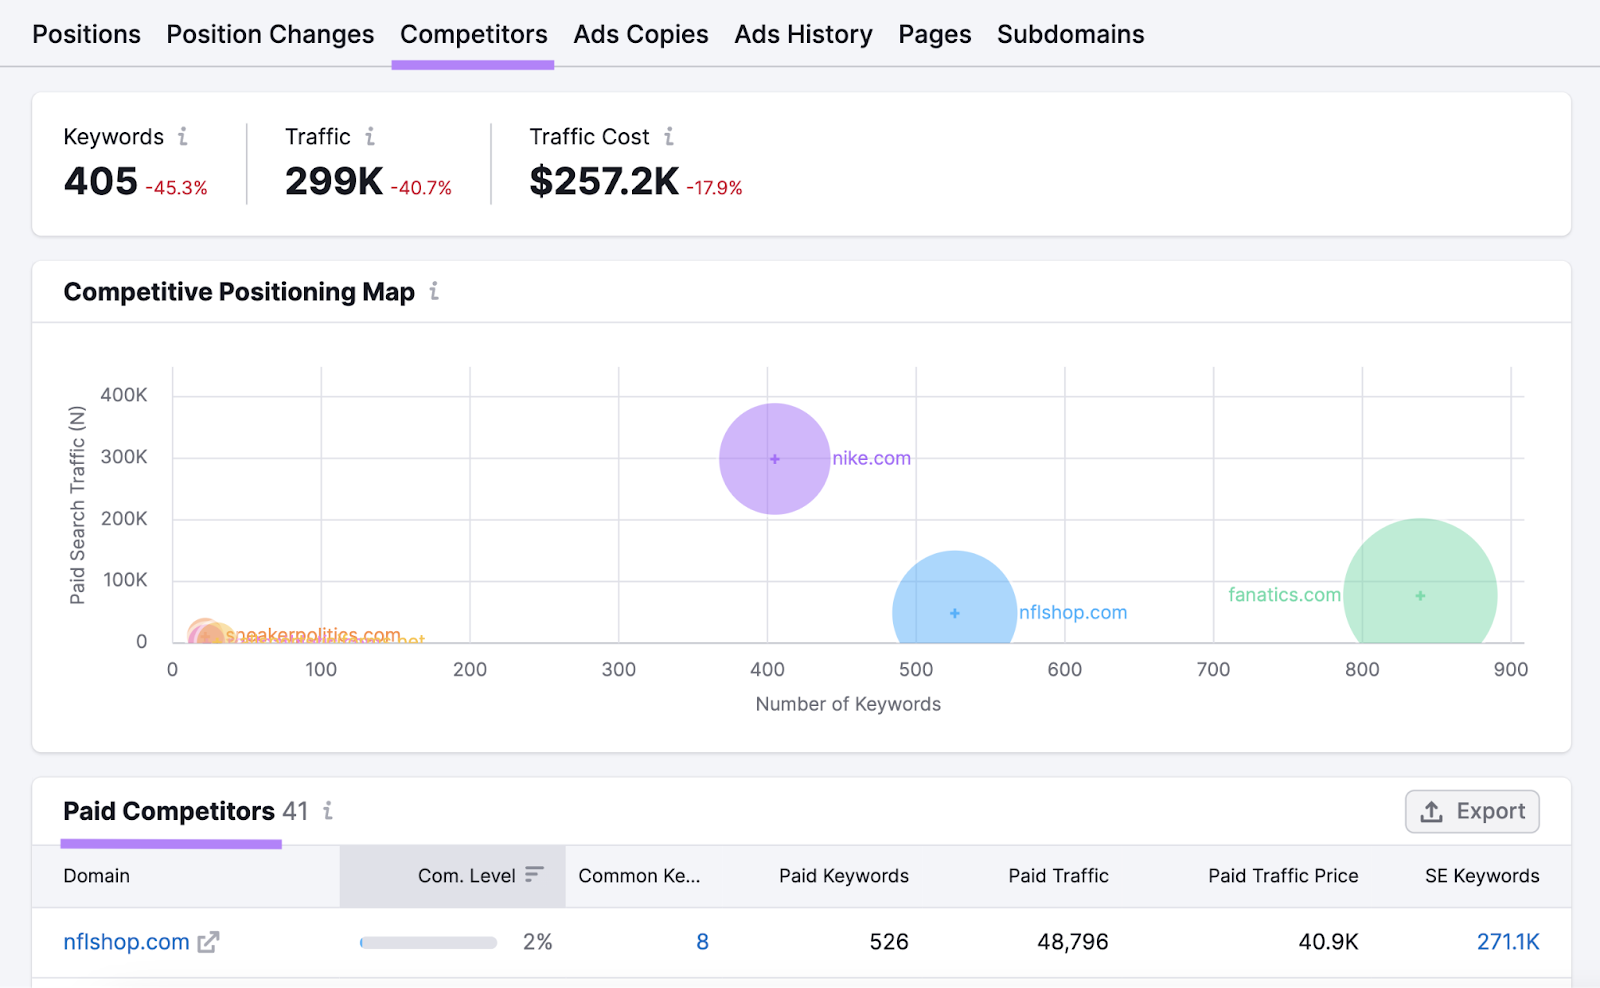 A section of the "Competitors" dashboard in Advertising Research tool